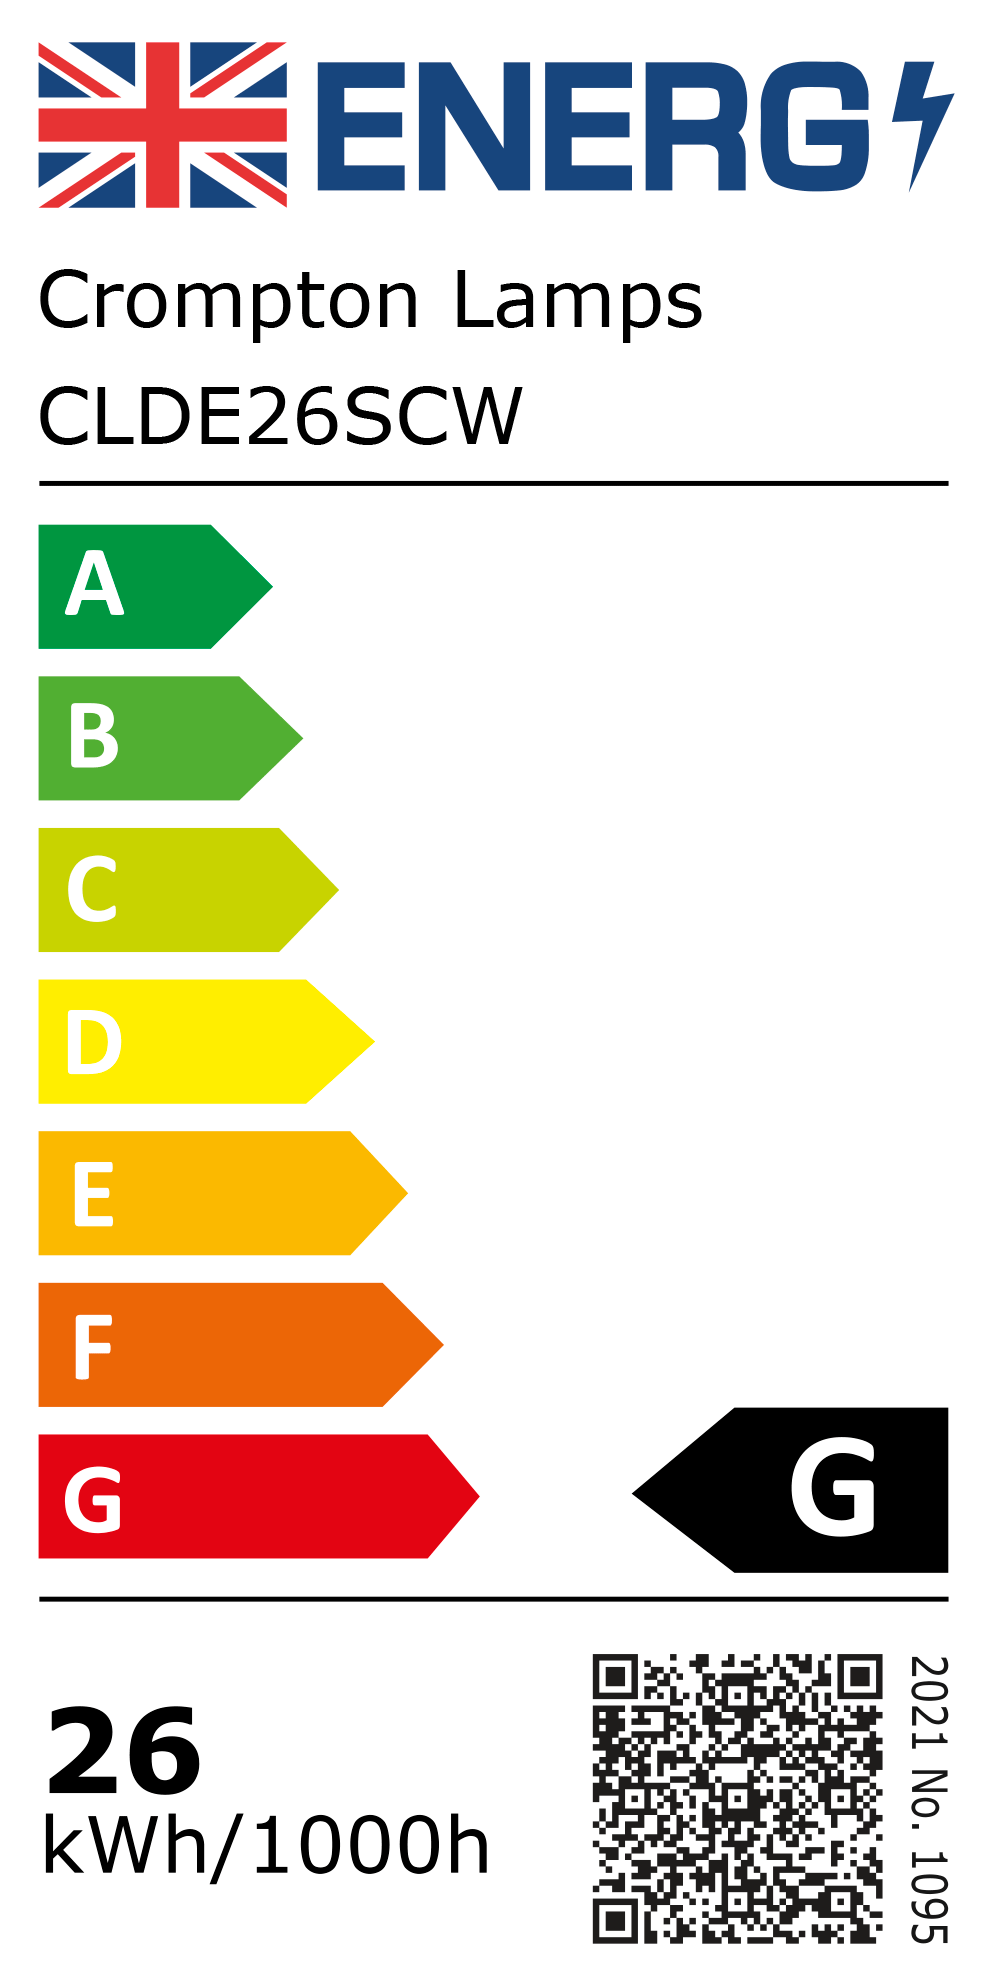 New 2021 Energy Rating Label: Stock Code CLDE26SCW